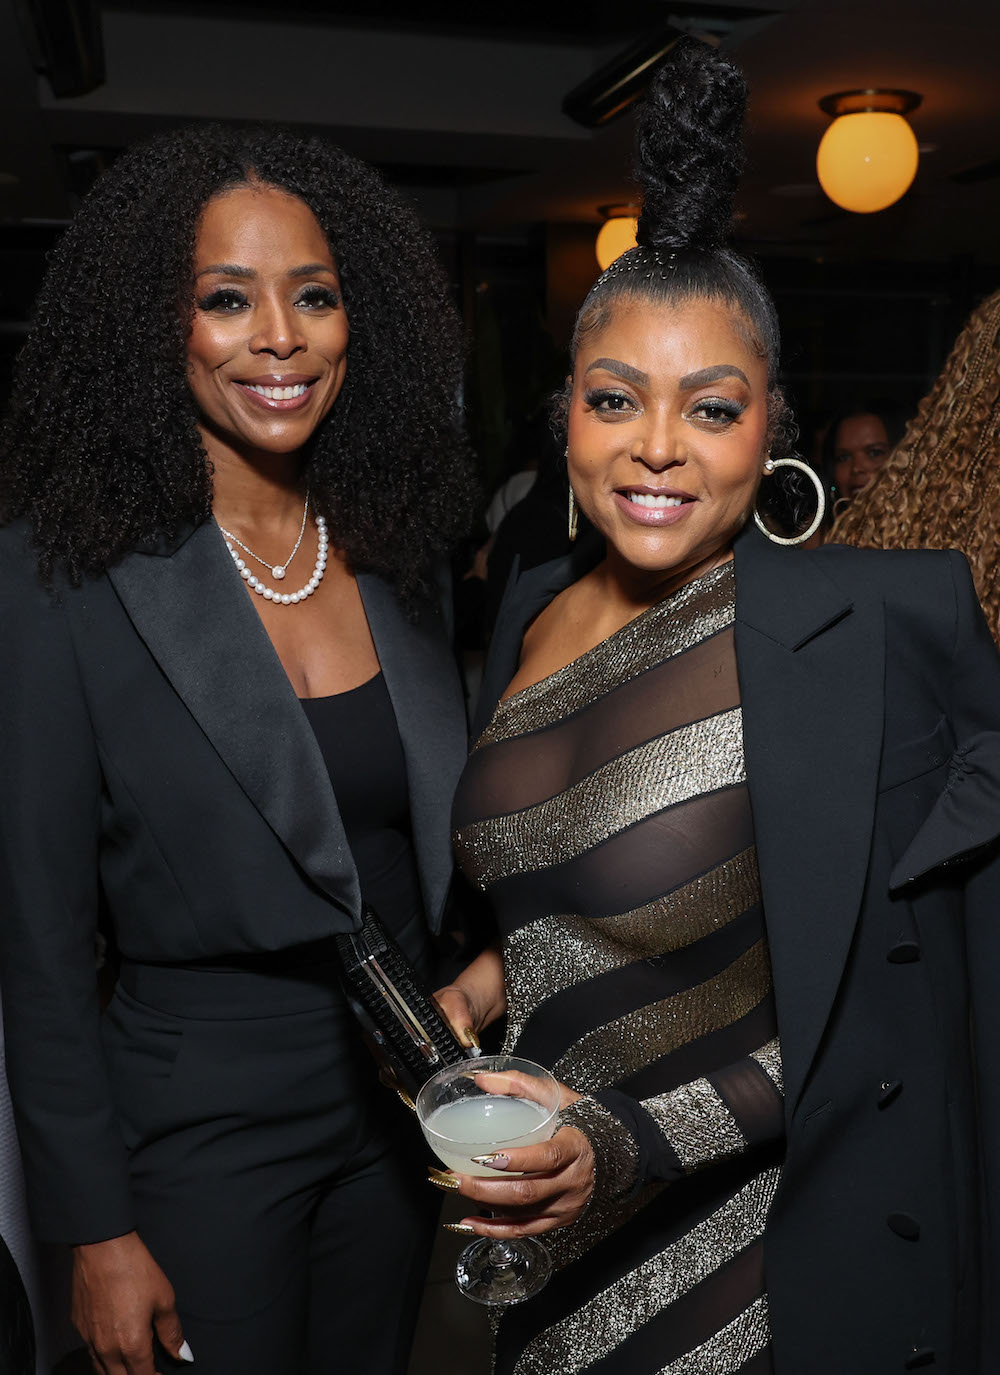 Tasha Smith (L) and Taraji P. Henson attend 2024 Celebration of Black Women in Entertainment dinner hosted by CAA Amplify. Image: Randy Shropshire/Getty Images for CAA.